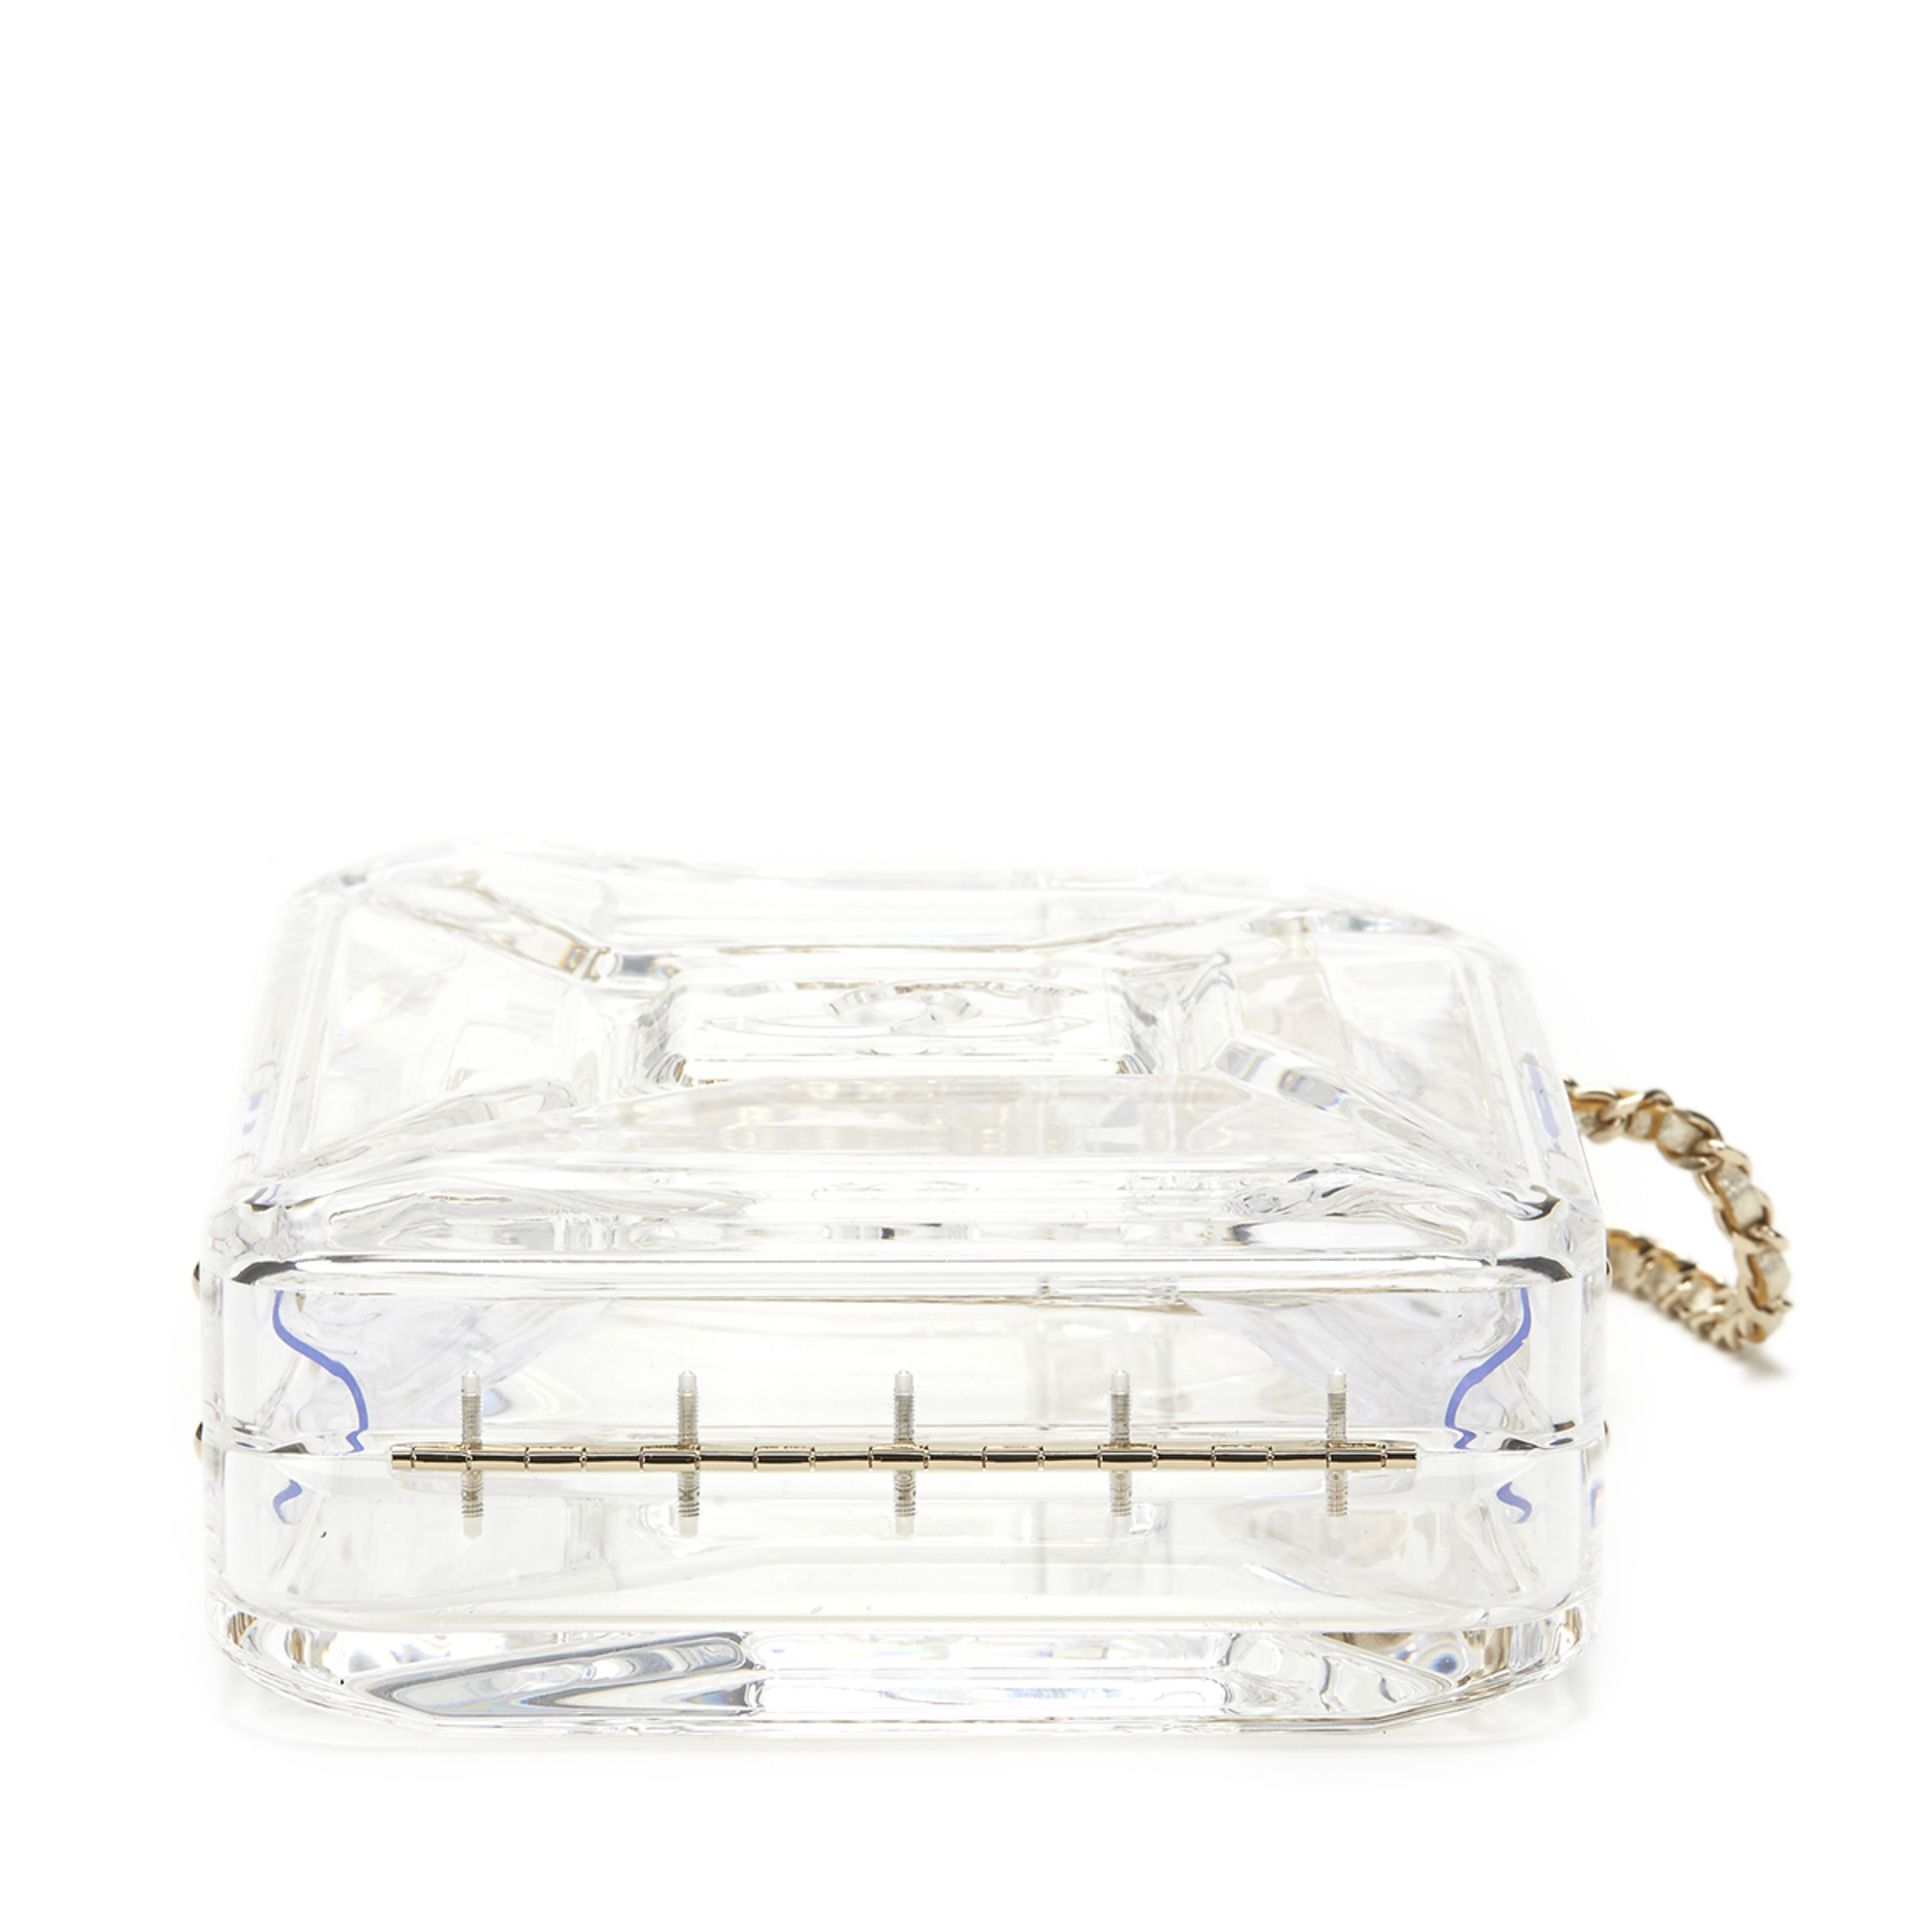 Chanel Gas Can Minaudiere - Image 3 of 8